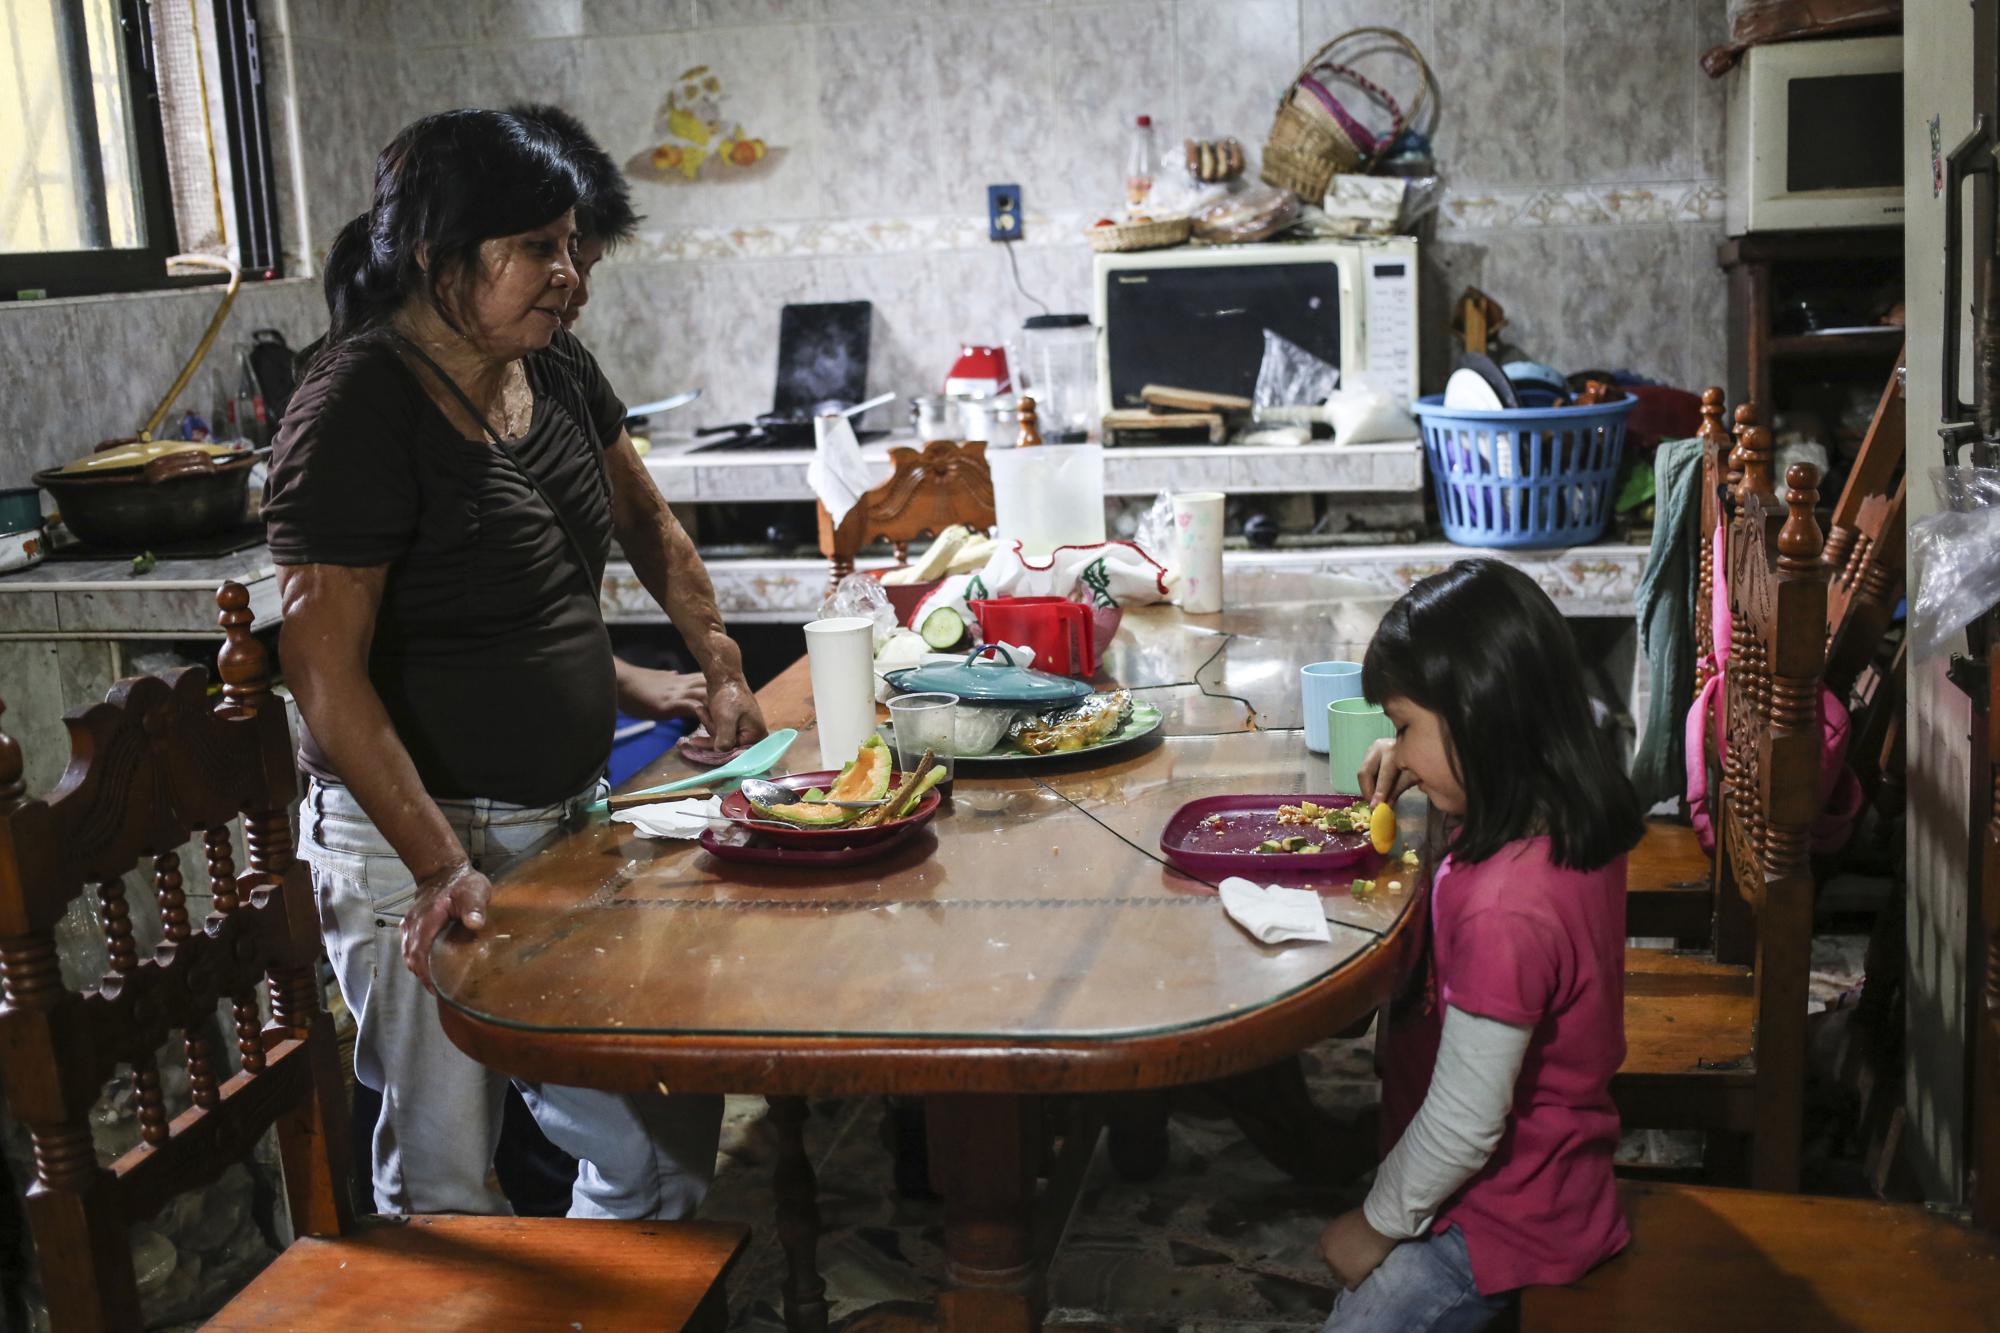 Elisa Xolalpa, who survived an acid attack while tied to a post by her ex-partner 20 years ago when she was 18, waits for her six-year-old daughter Monserrat to finish lunch in the kitchen of Elisa's parents' home in Mexico City, Sunday, July 4, 2021. Xolalpa recognizes that one day she will have to explain to her three daughters, product of another relationship, the attack that changed her life and for a time left her wanting to die. (AP Photo/Ginnette Riquelme)